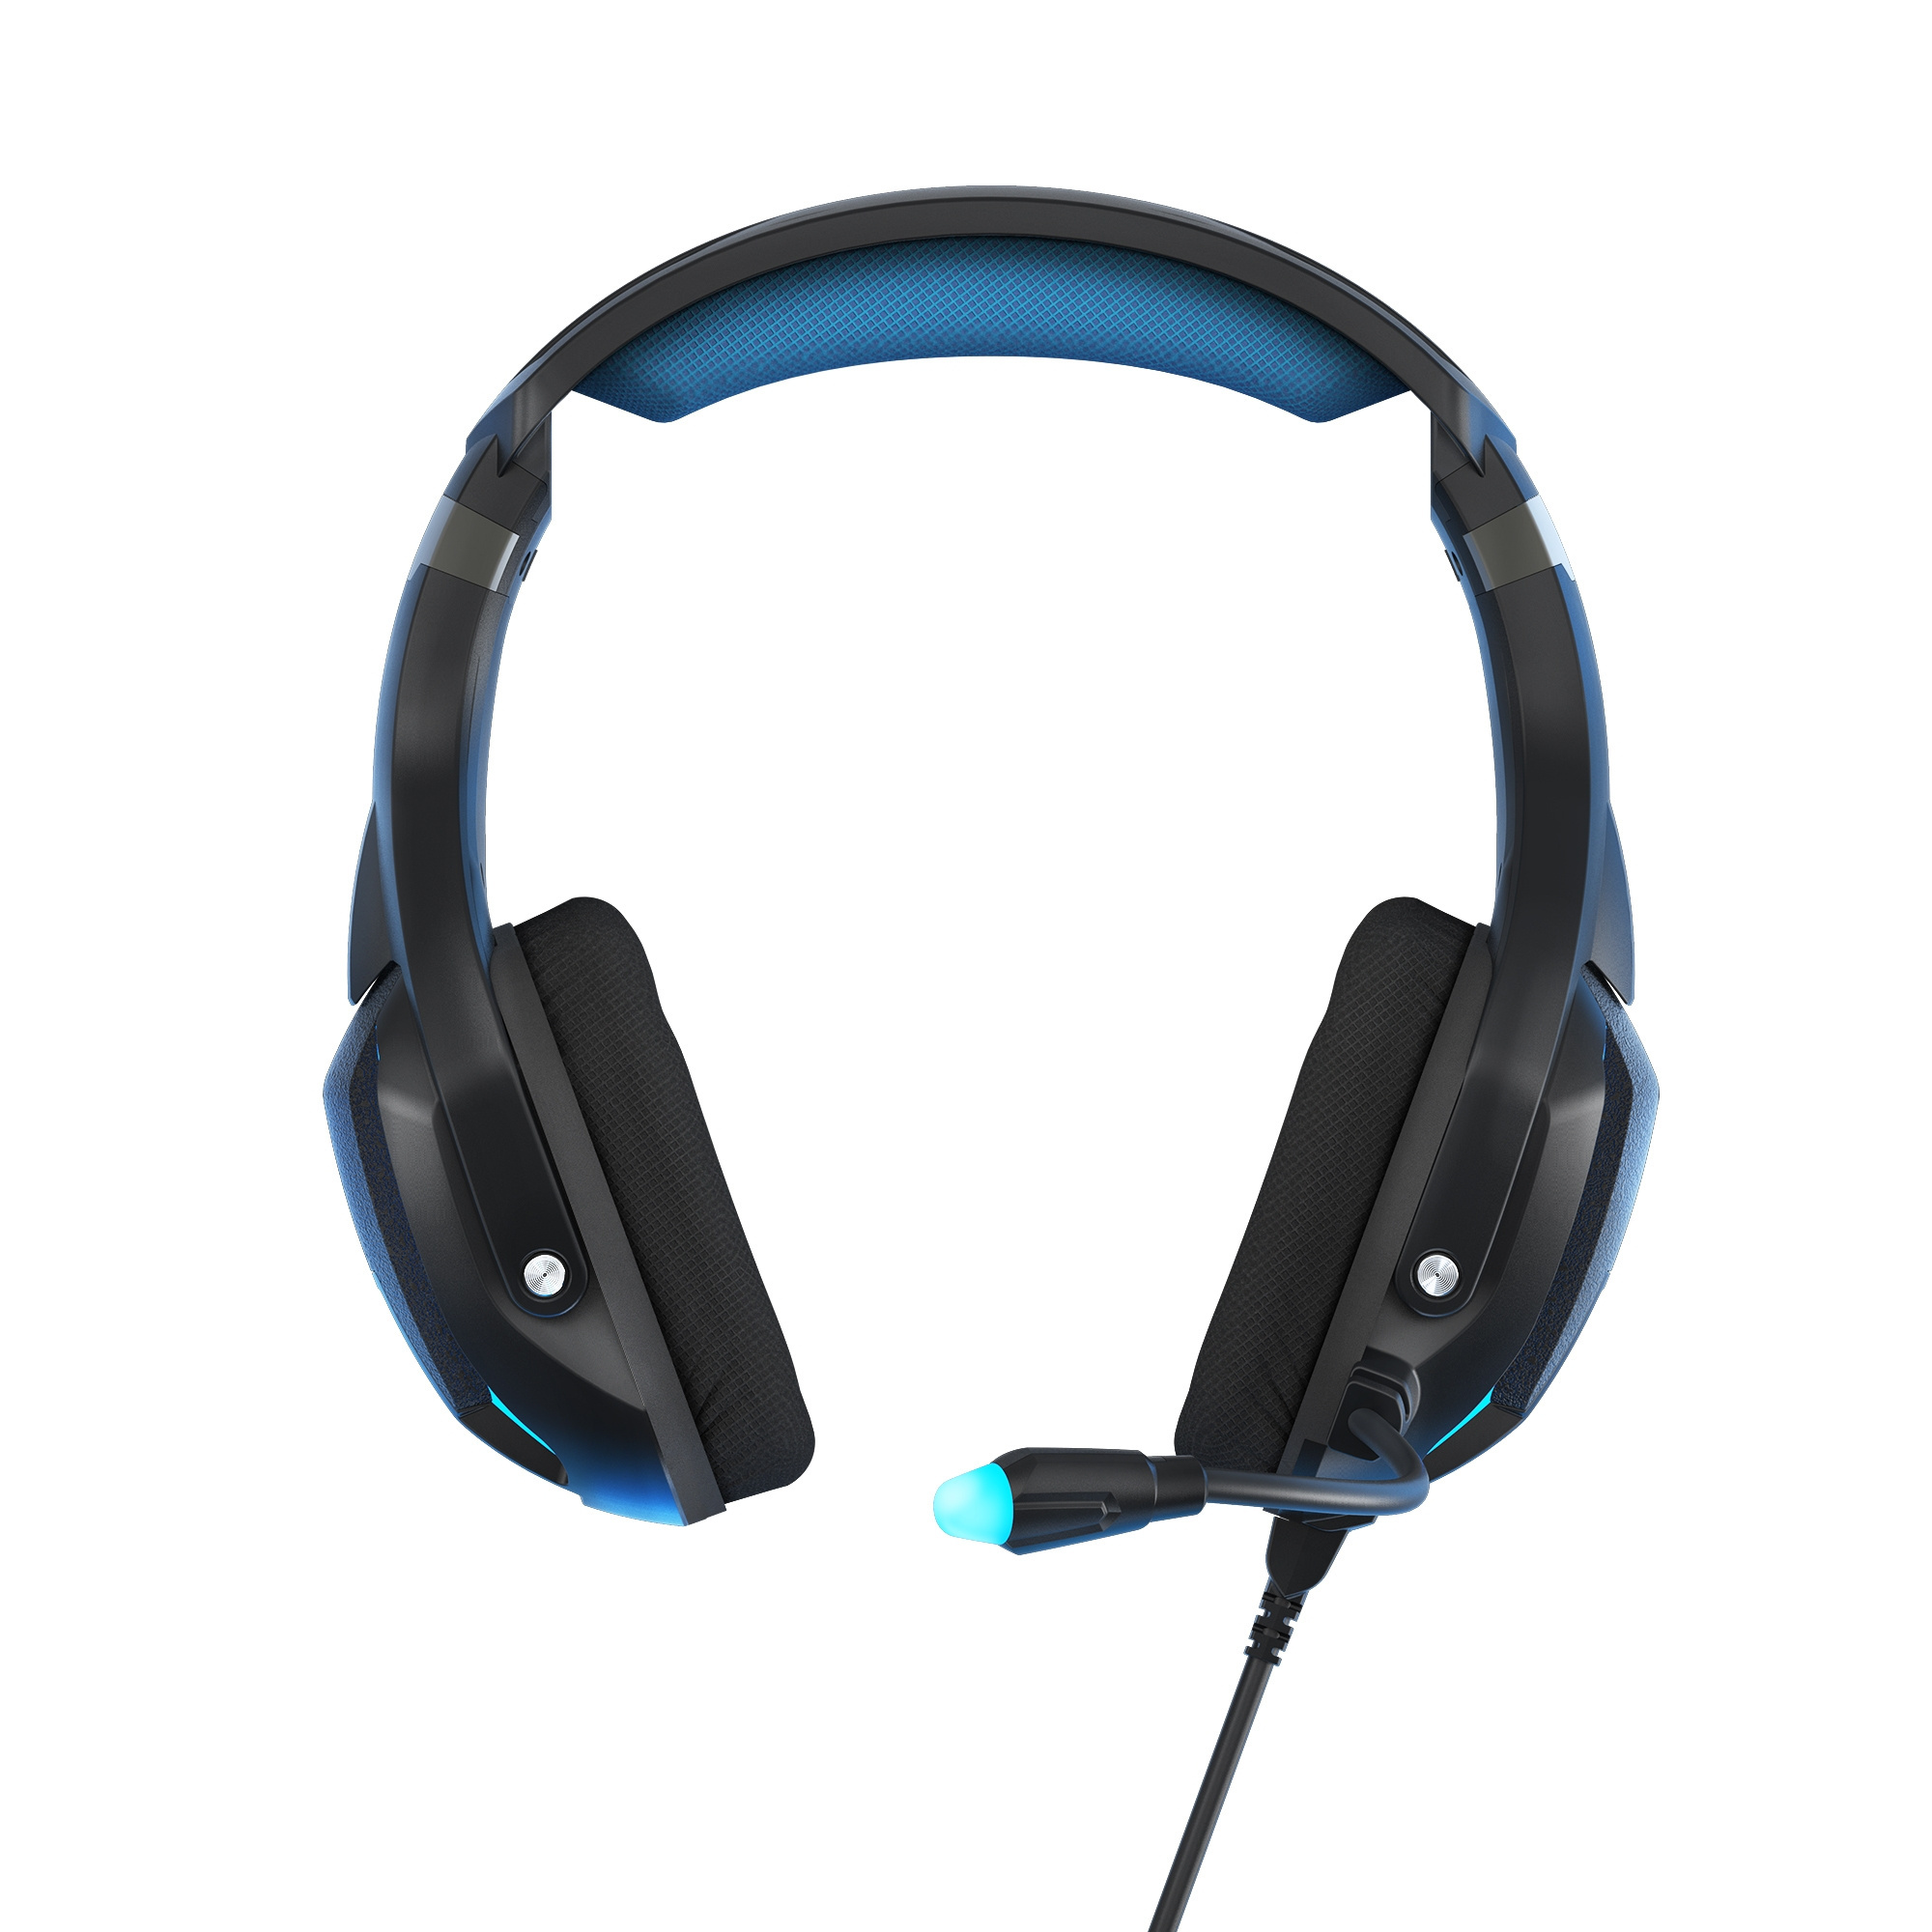 Over-ear design headphones for better isolation and comfort